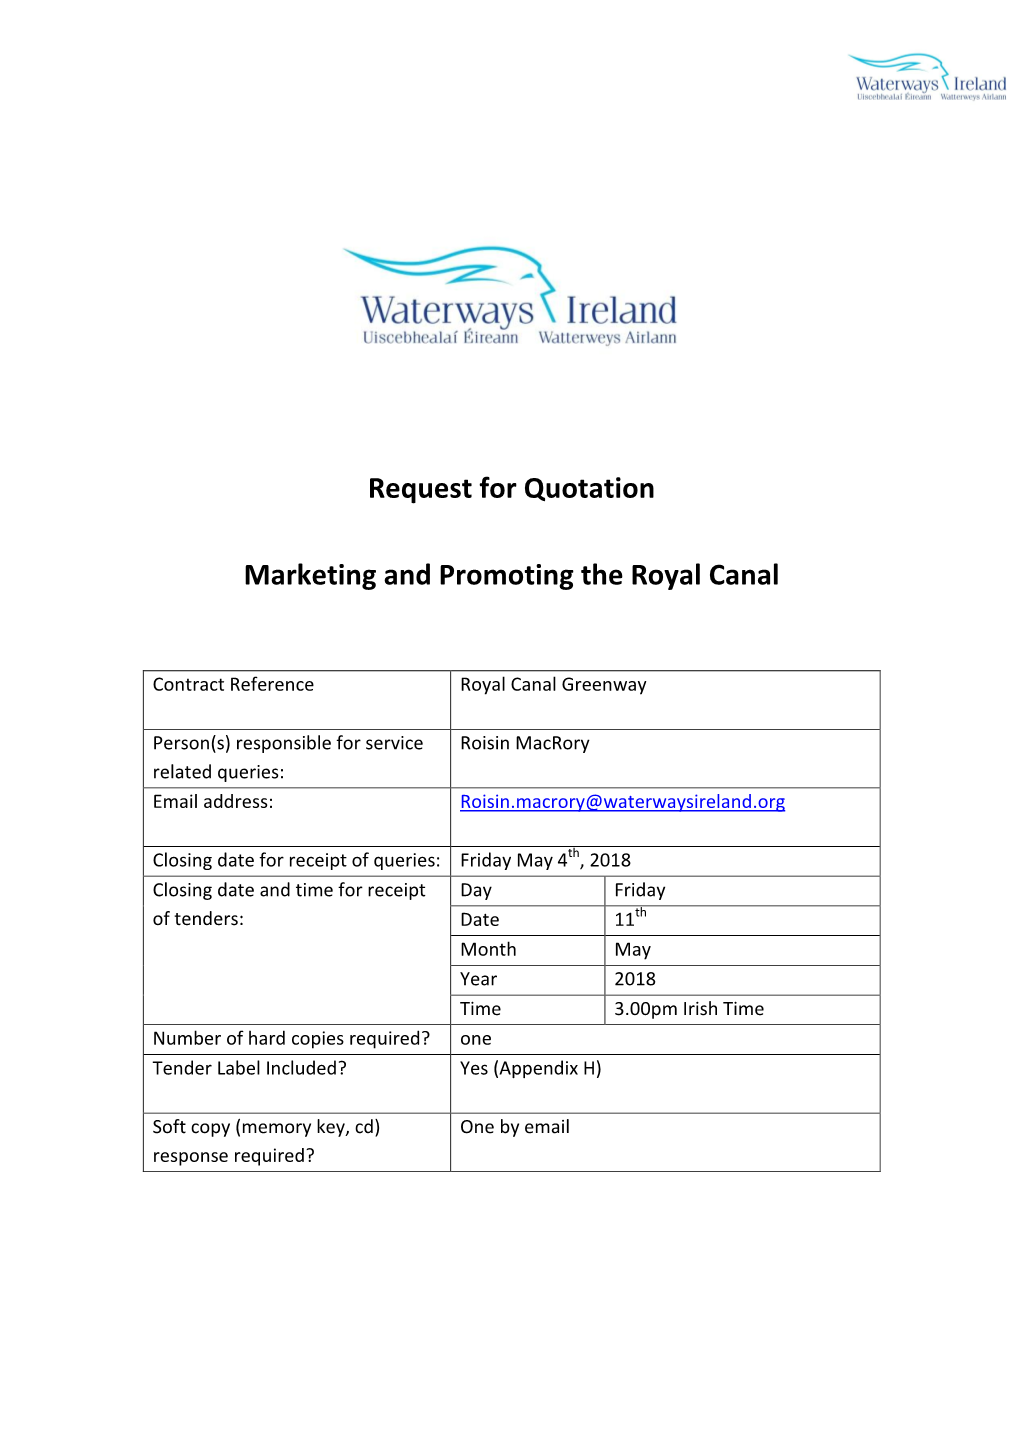 Request for Quotation Marketing and Promoting the Royal Canal